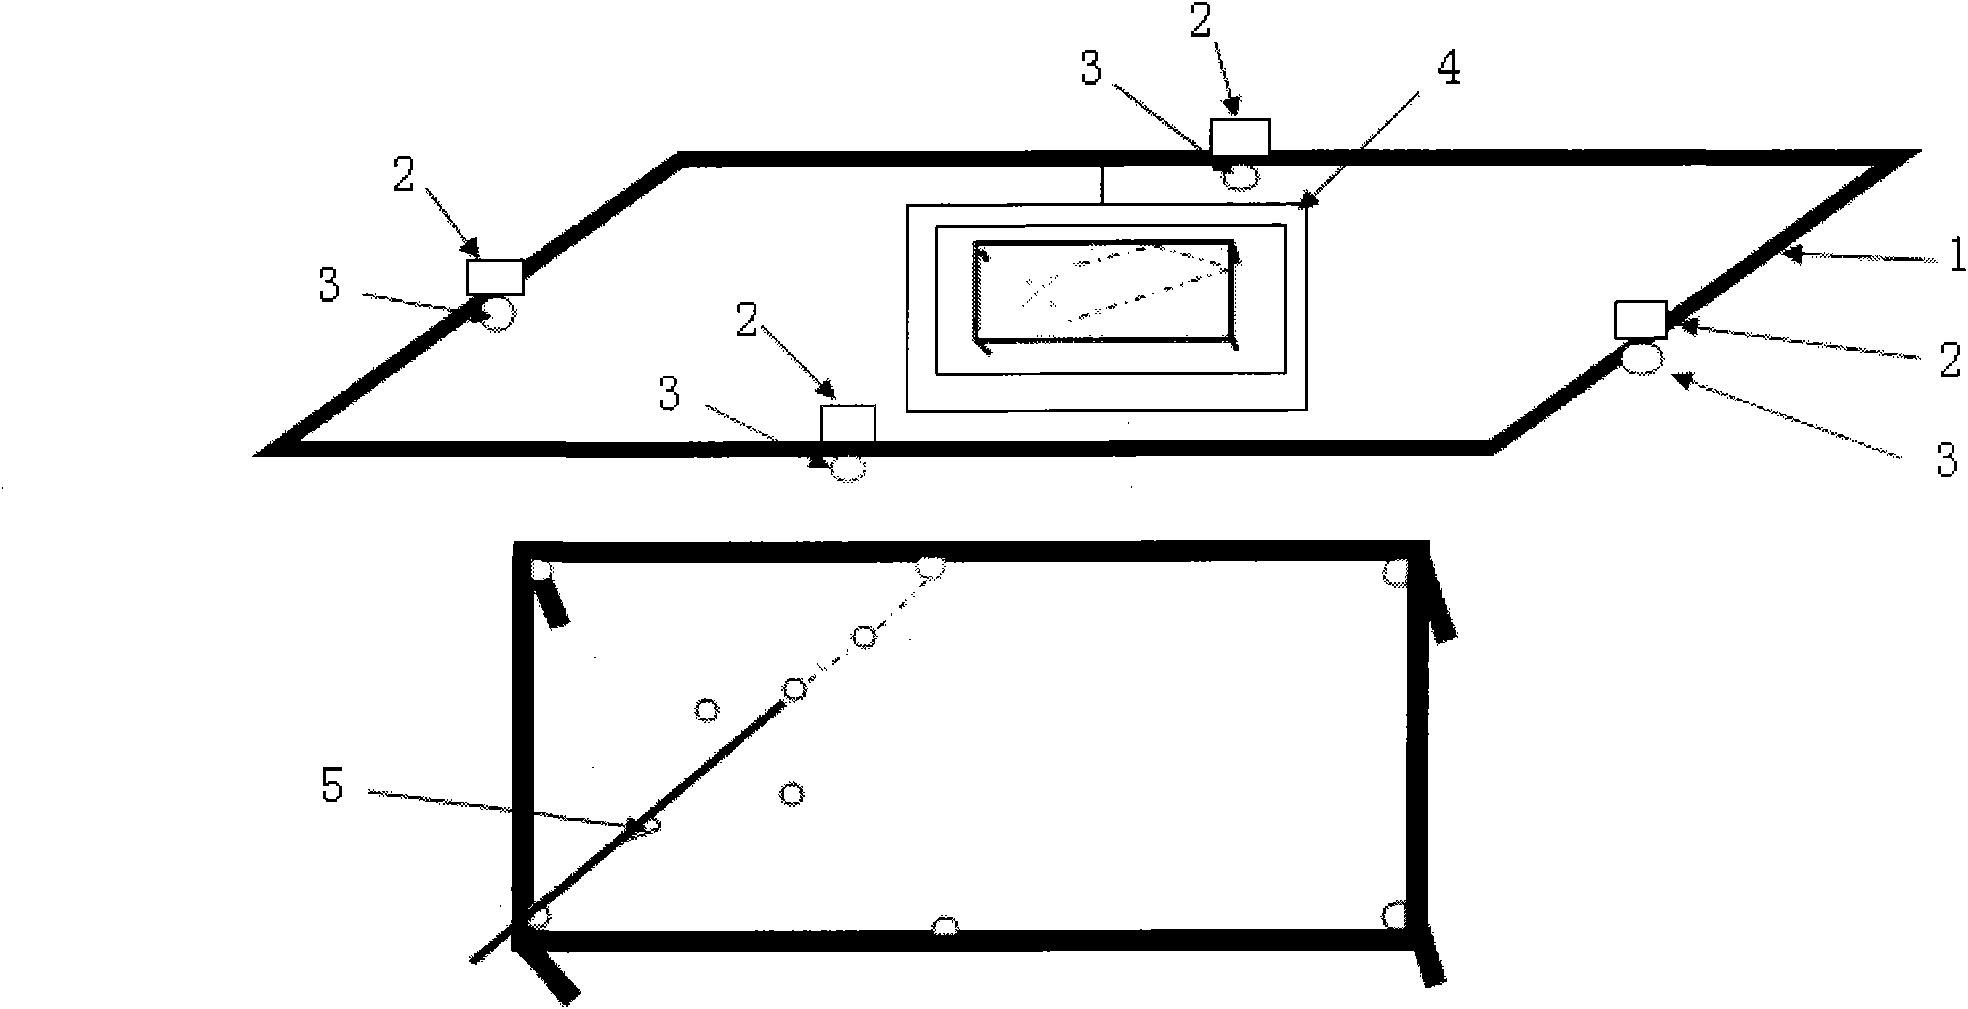 Television system for analyzing displacement of billiards